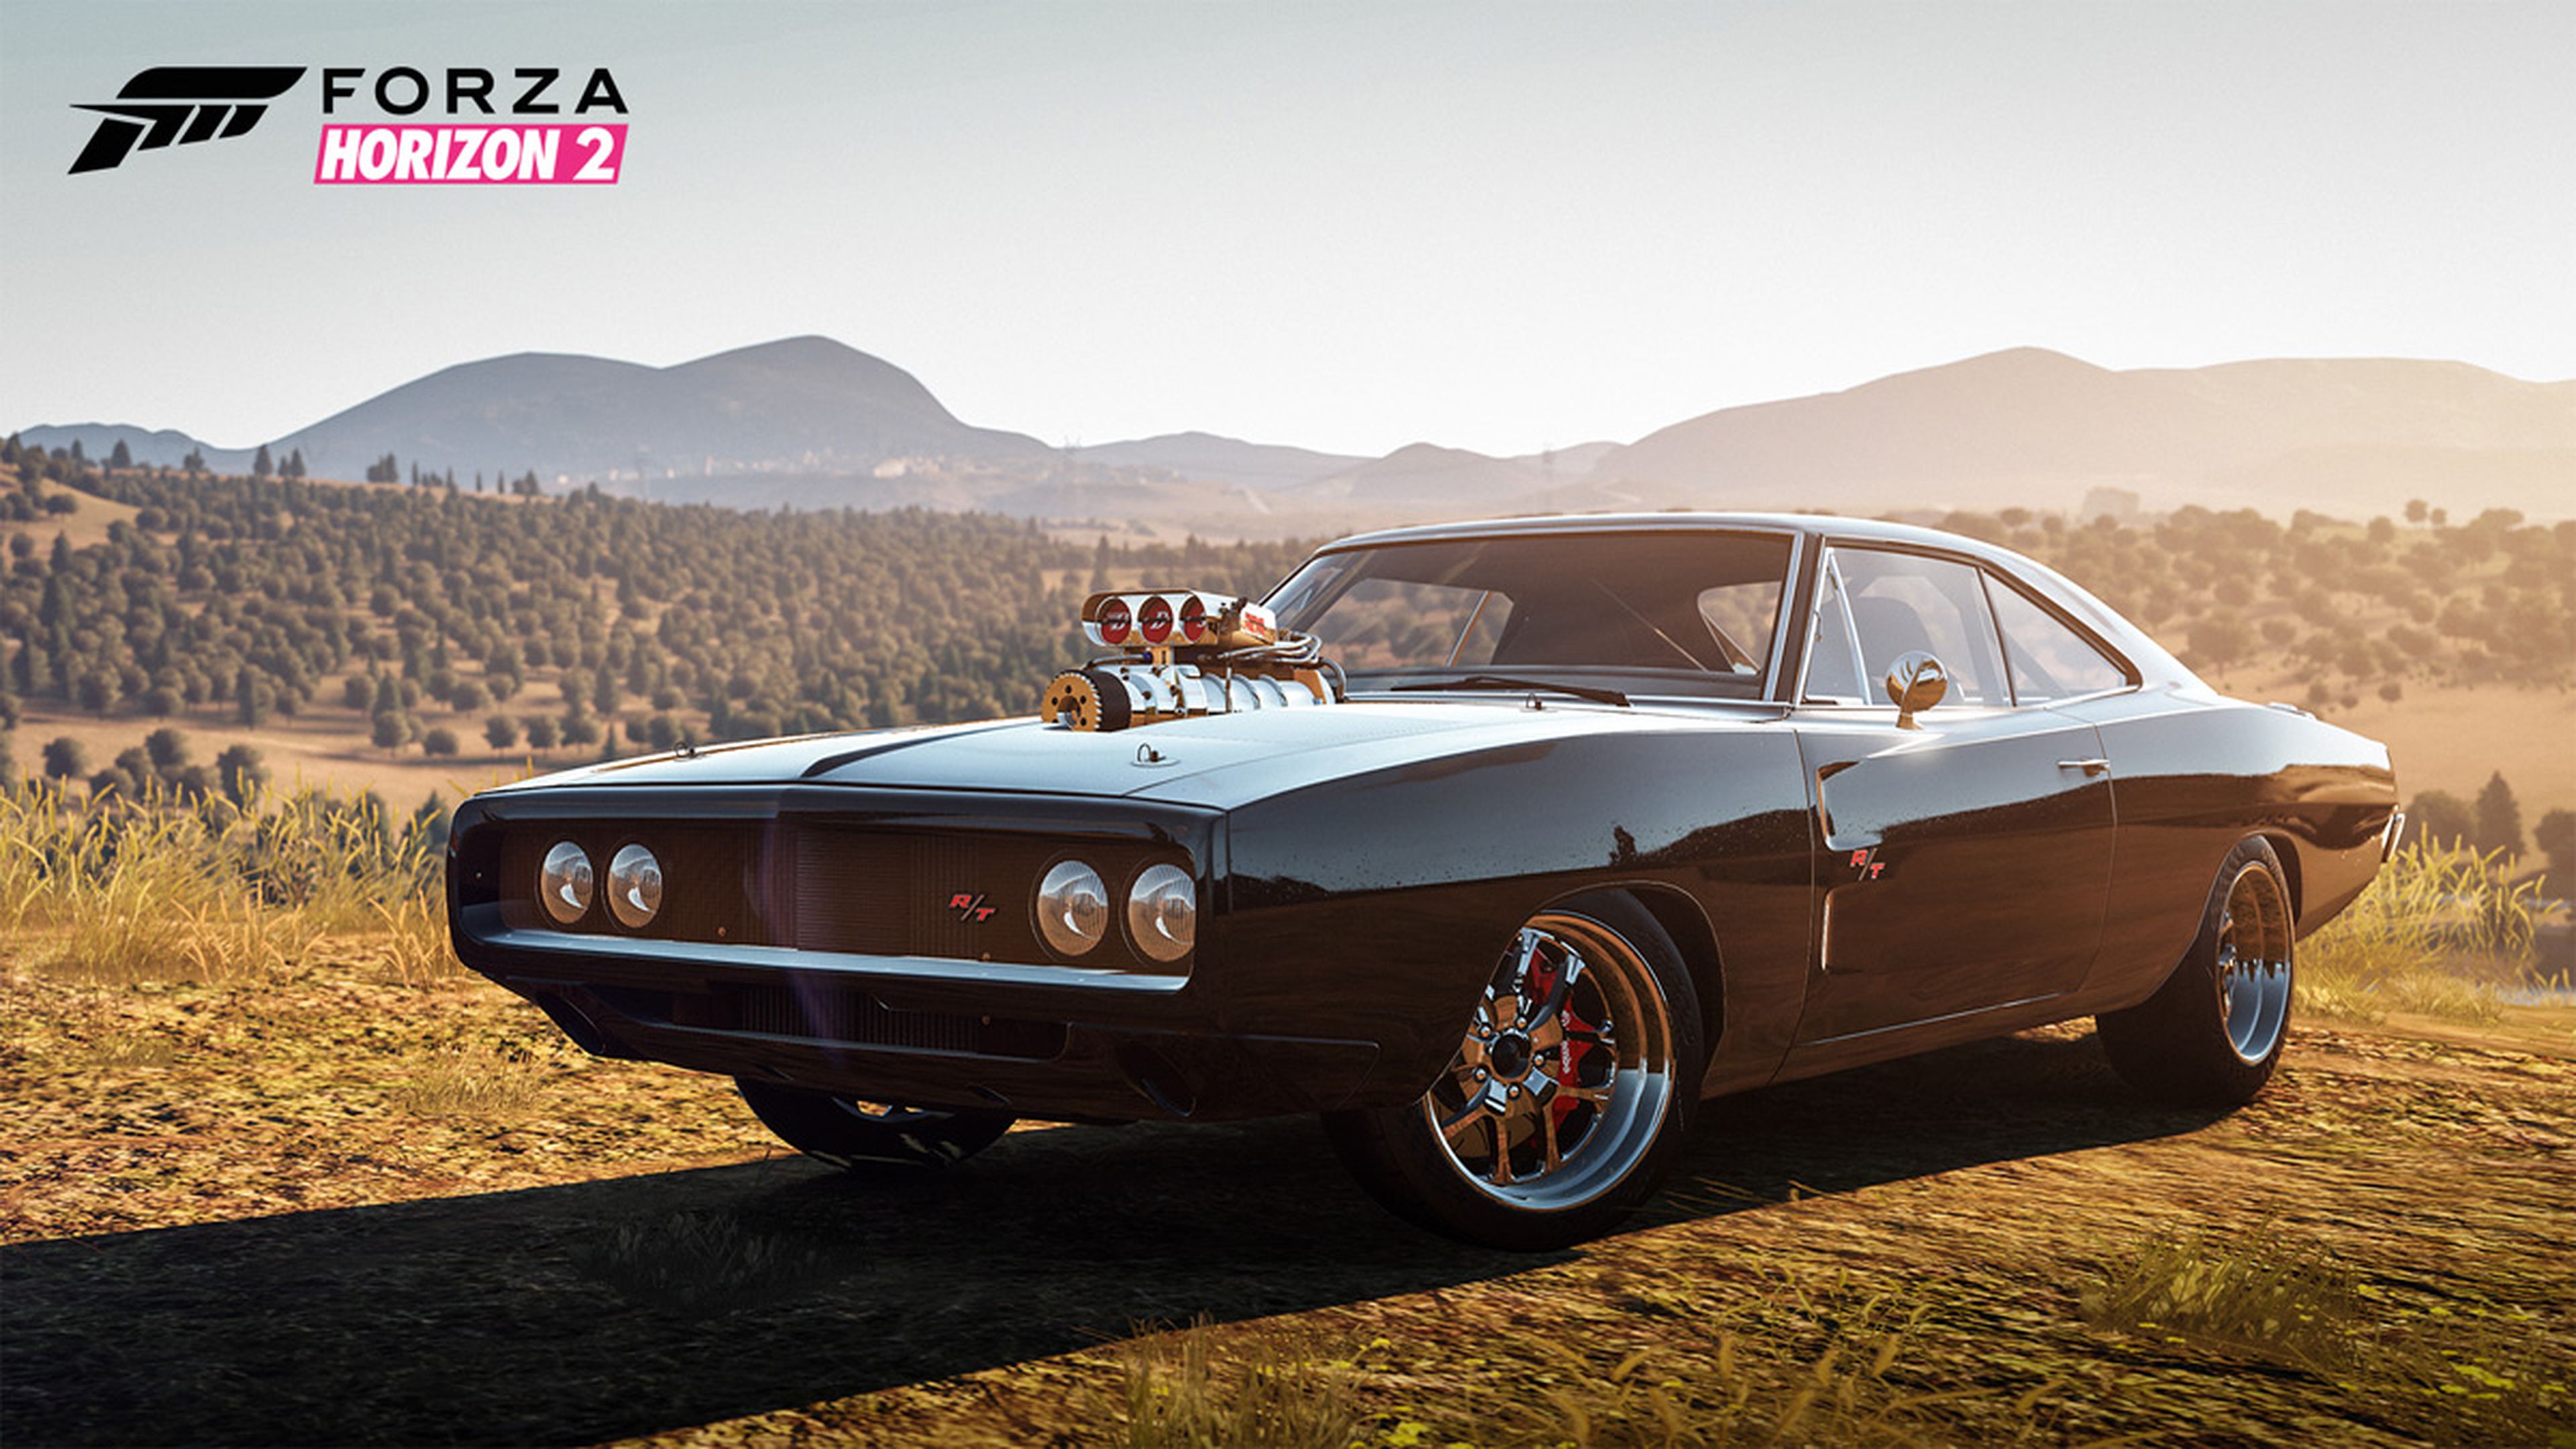 Forza Horizon 2 Furious 7 Car Pack - Dodge Charger blower